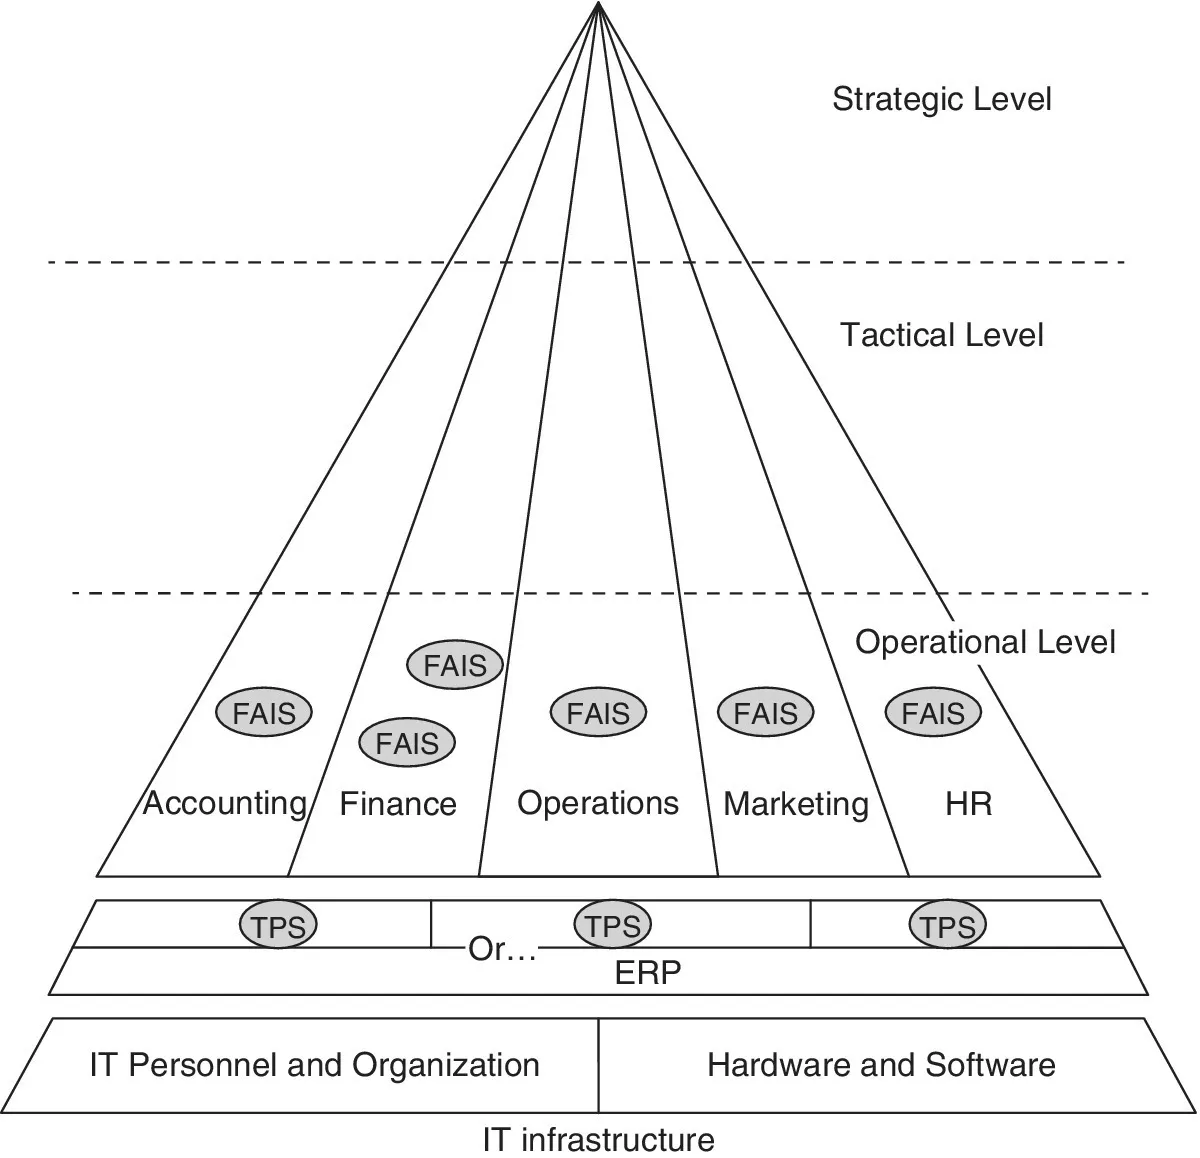 Schematic illustrating the information systems such as IT personnel and organization and hardware and software, with 3 levels labeled strategic level, tactical level, and operational level.